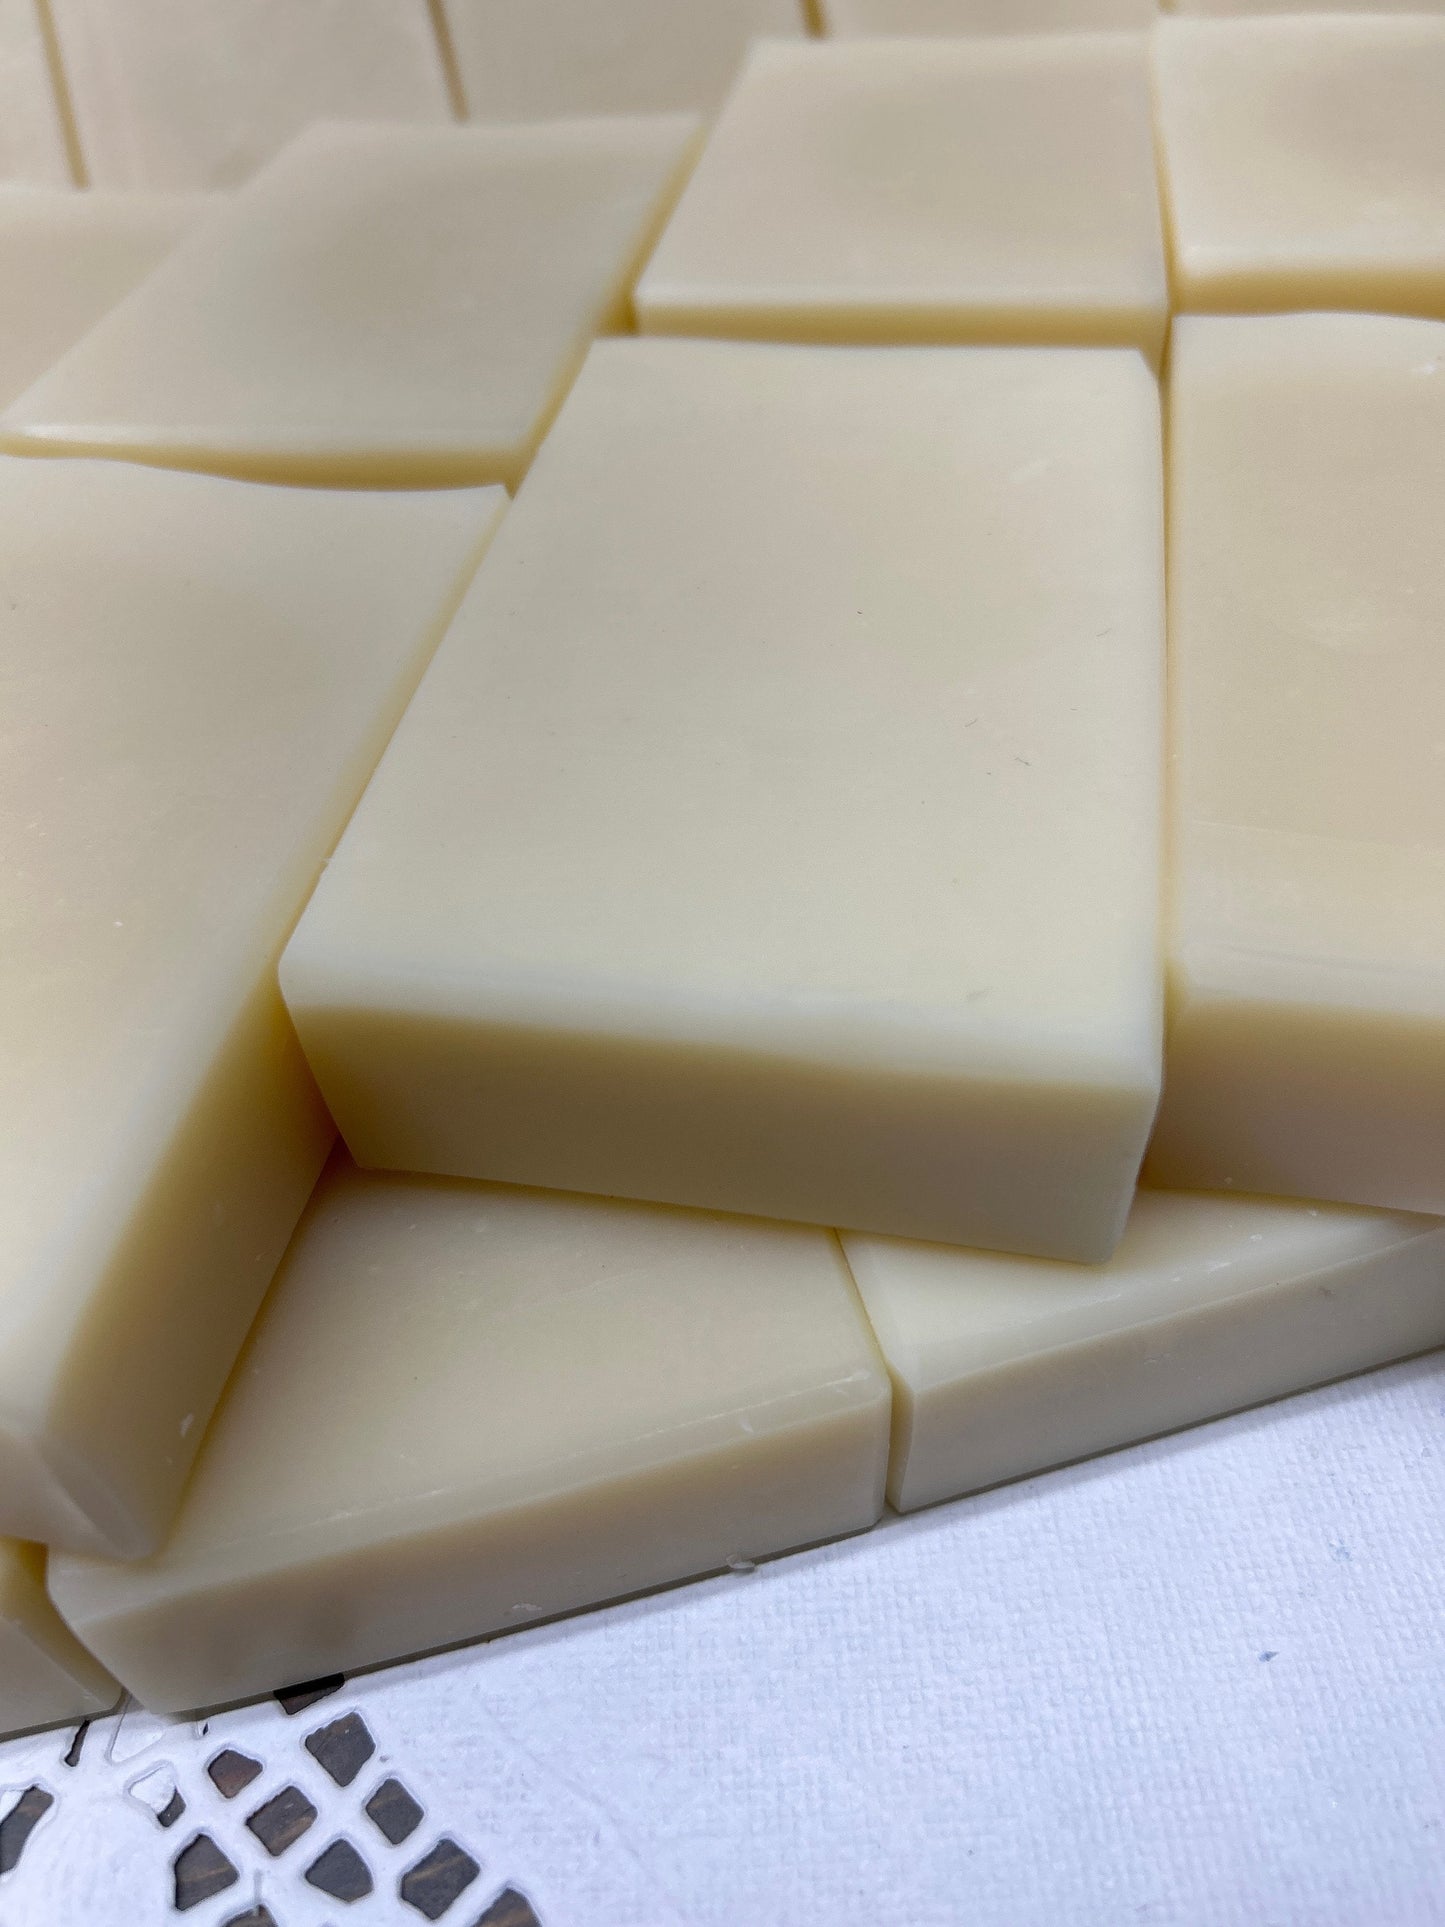 Baby/Shaving 5.0+ oz Bar Soap, super bubbly, gentle, mild, cleansing, luscious bubbles, no color and no scent